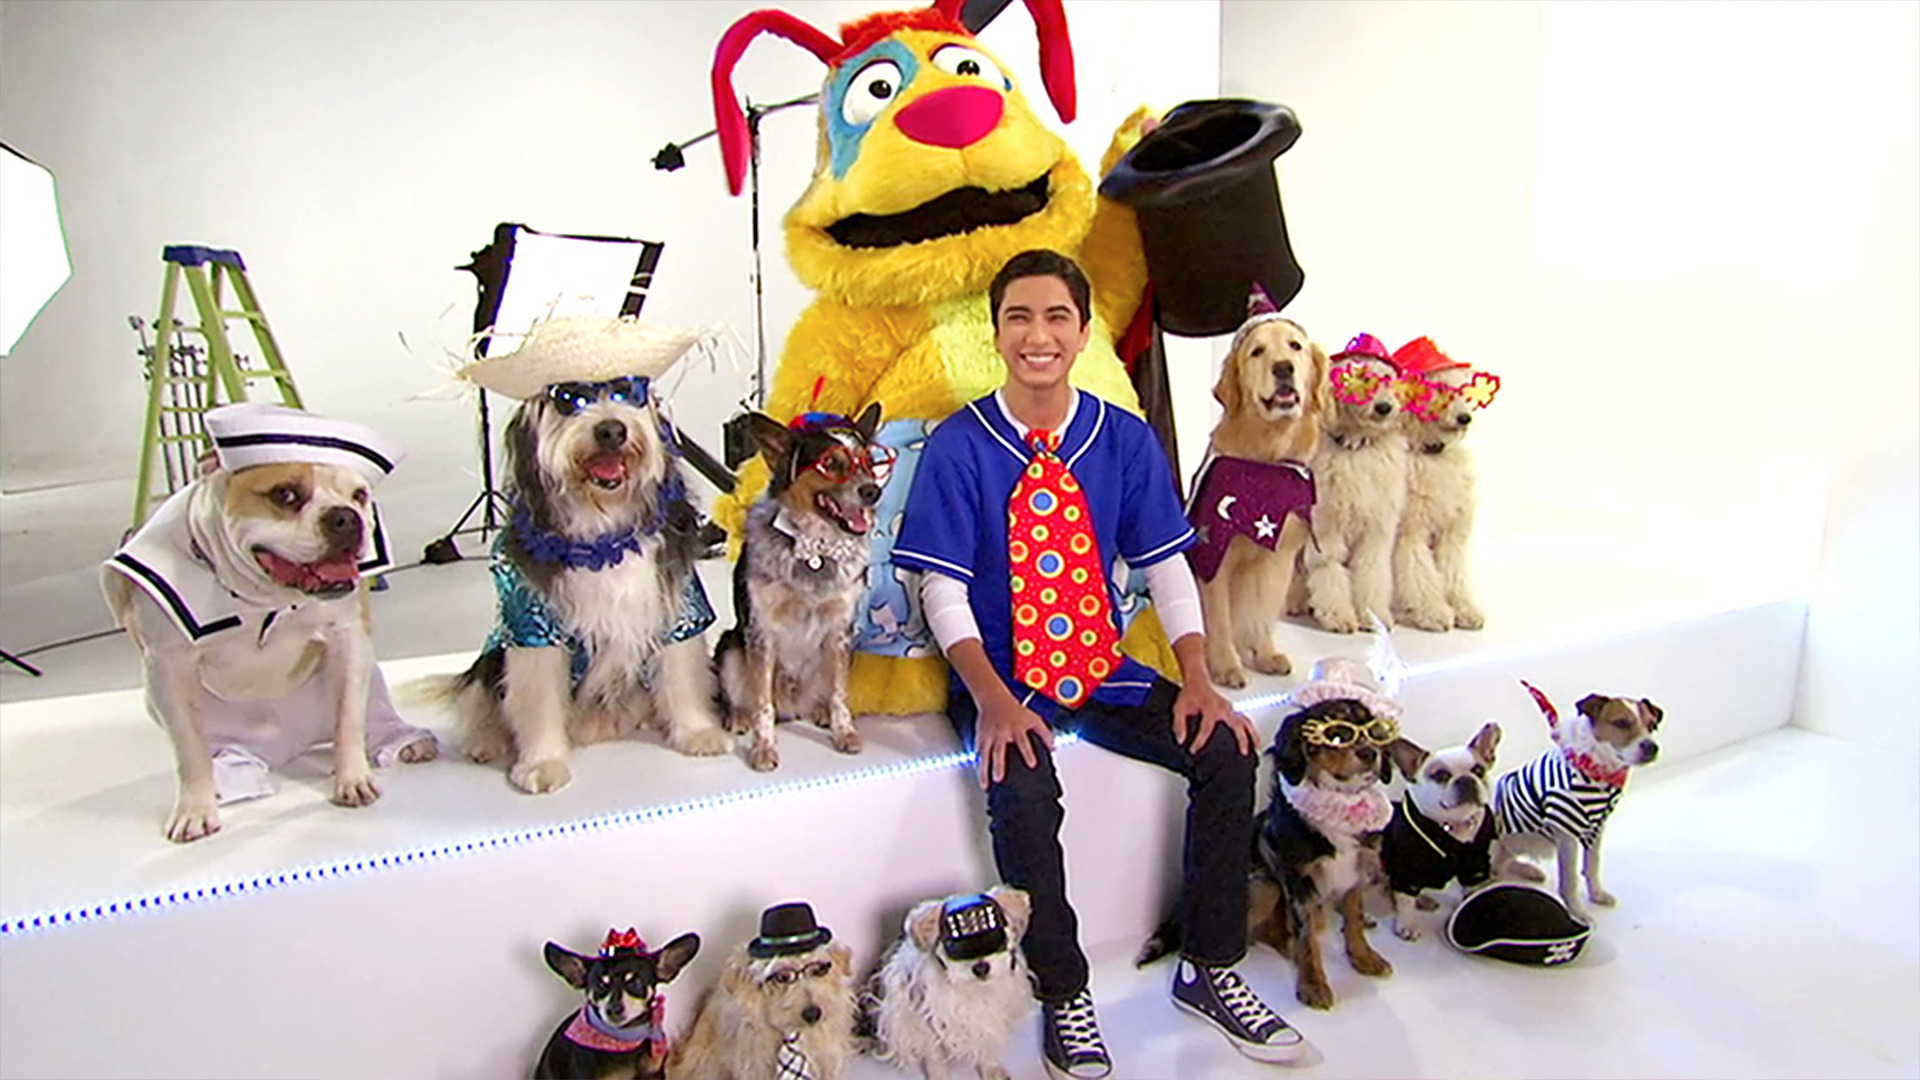 Watch Mutt & Stuff Season 1 Episode 2: Class Picture Day show on Paramount Plus